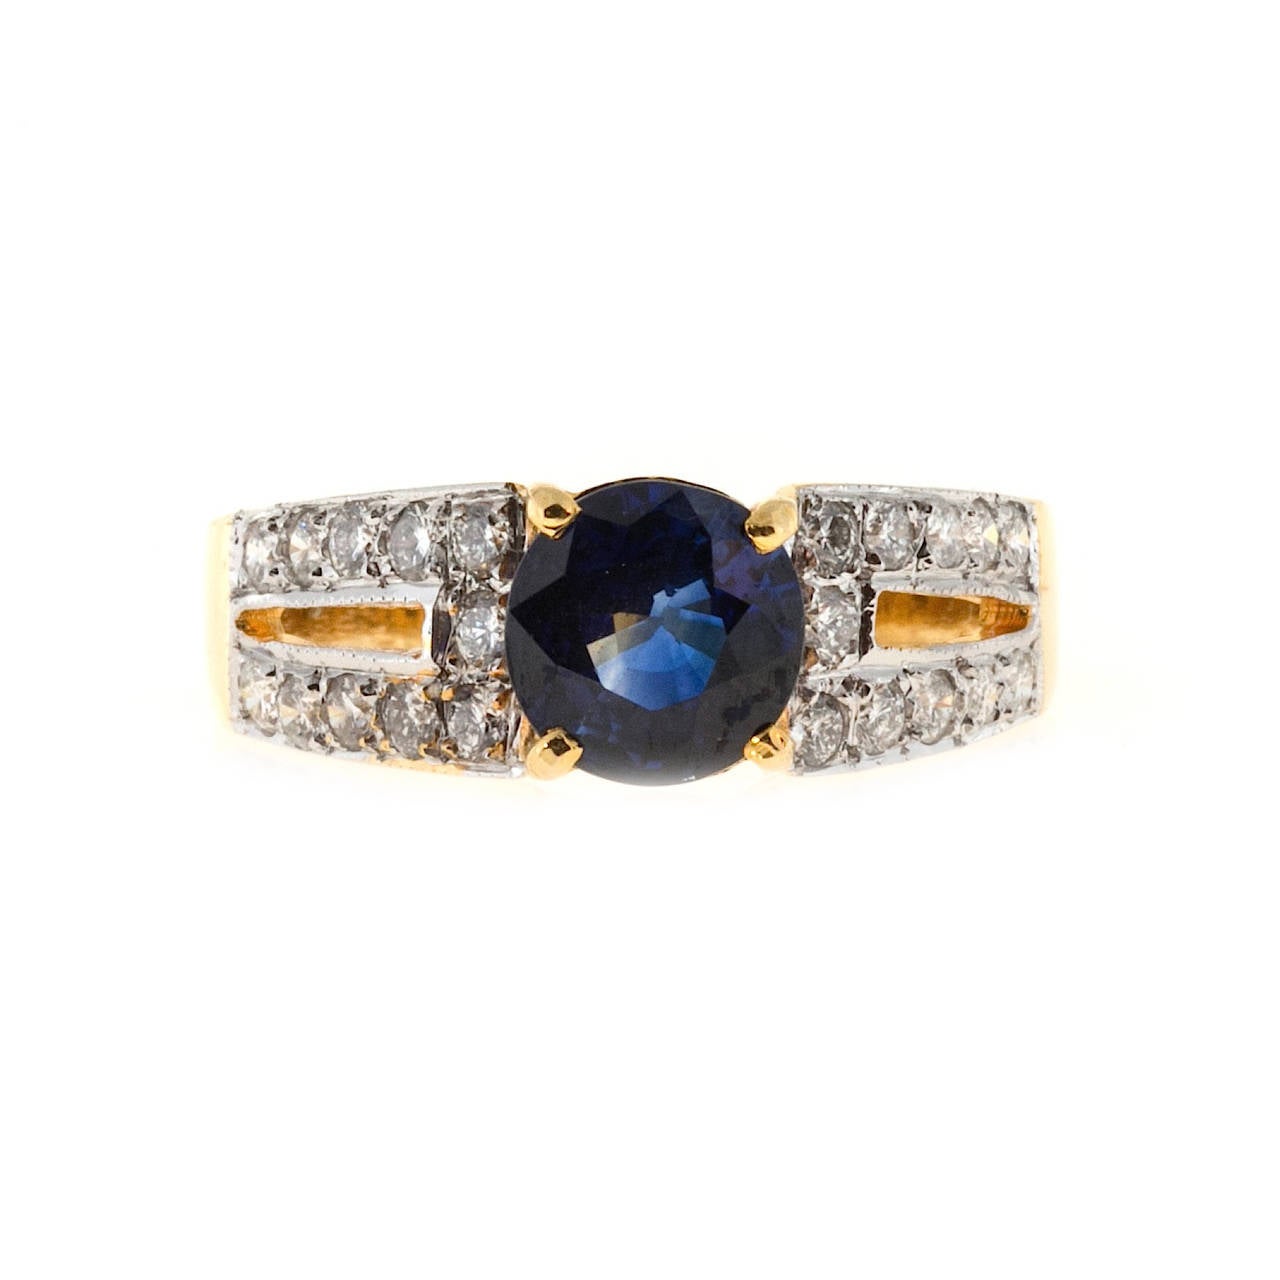 Beautiful estate handmade ring in 20k yellow gold with white gold shoulders pave set with E to F color, VS clarity diamonds.  The center contains a top vivid blue genuine well cut round sapphire, as bright blue as anything in my store.

1 round